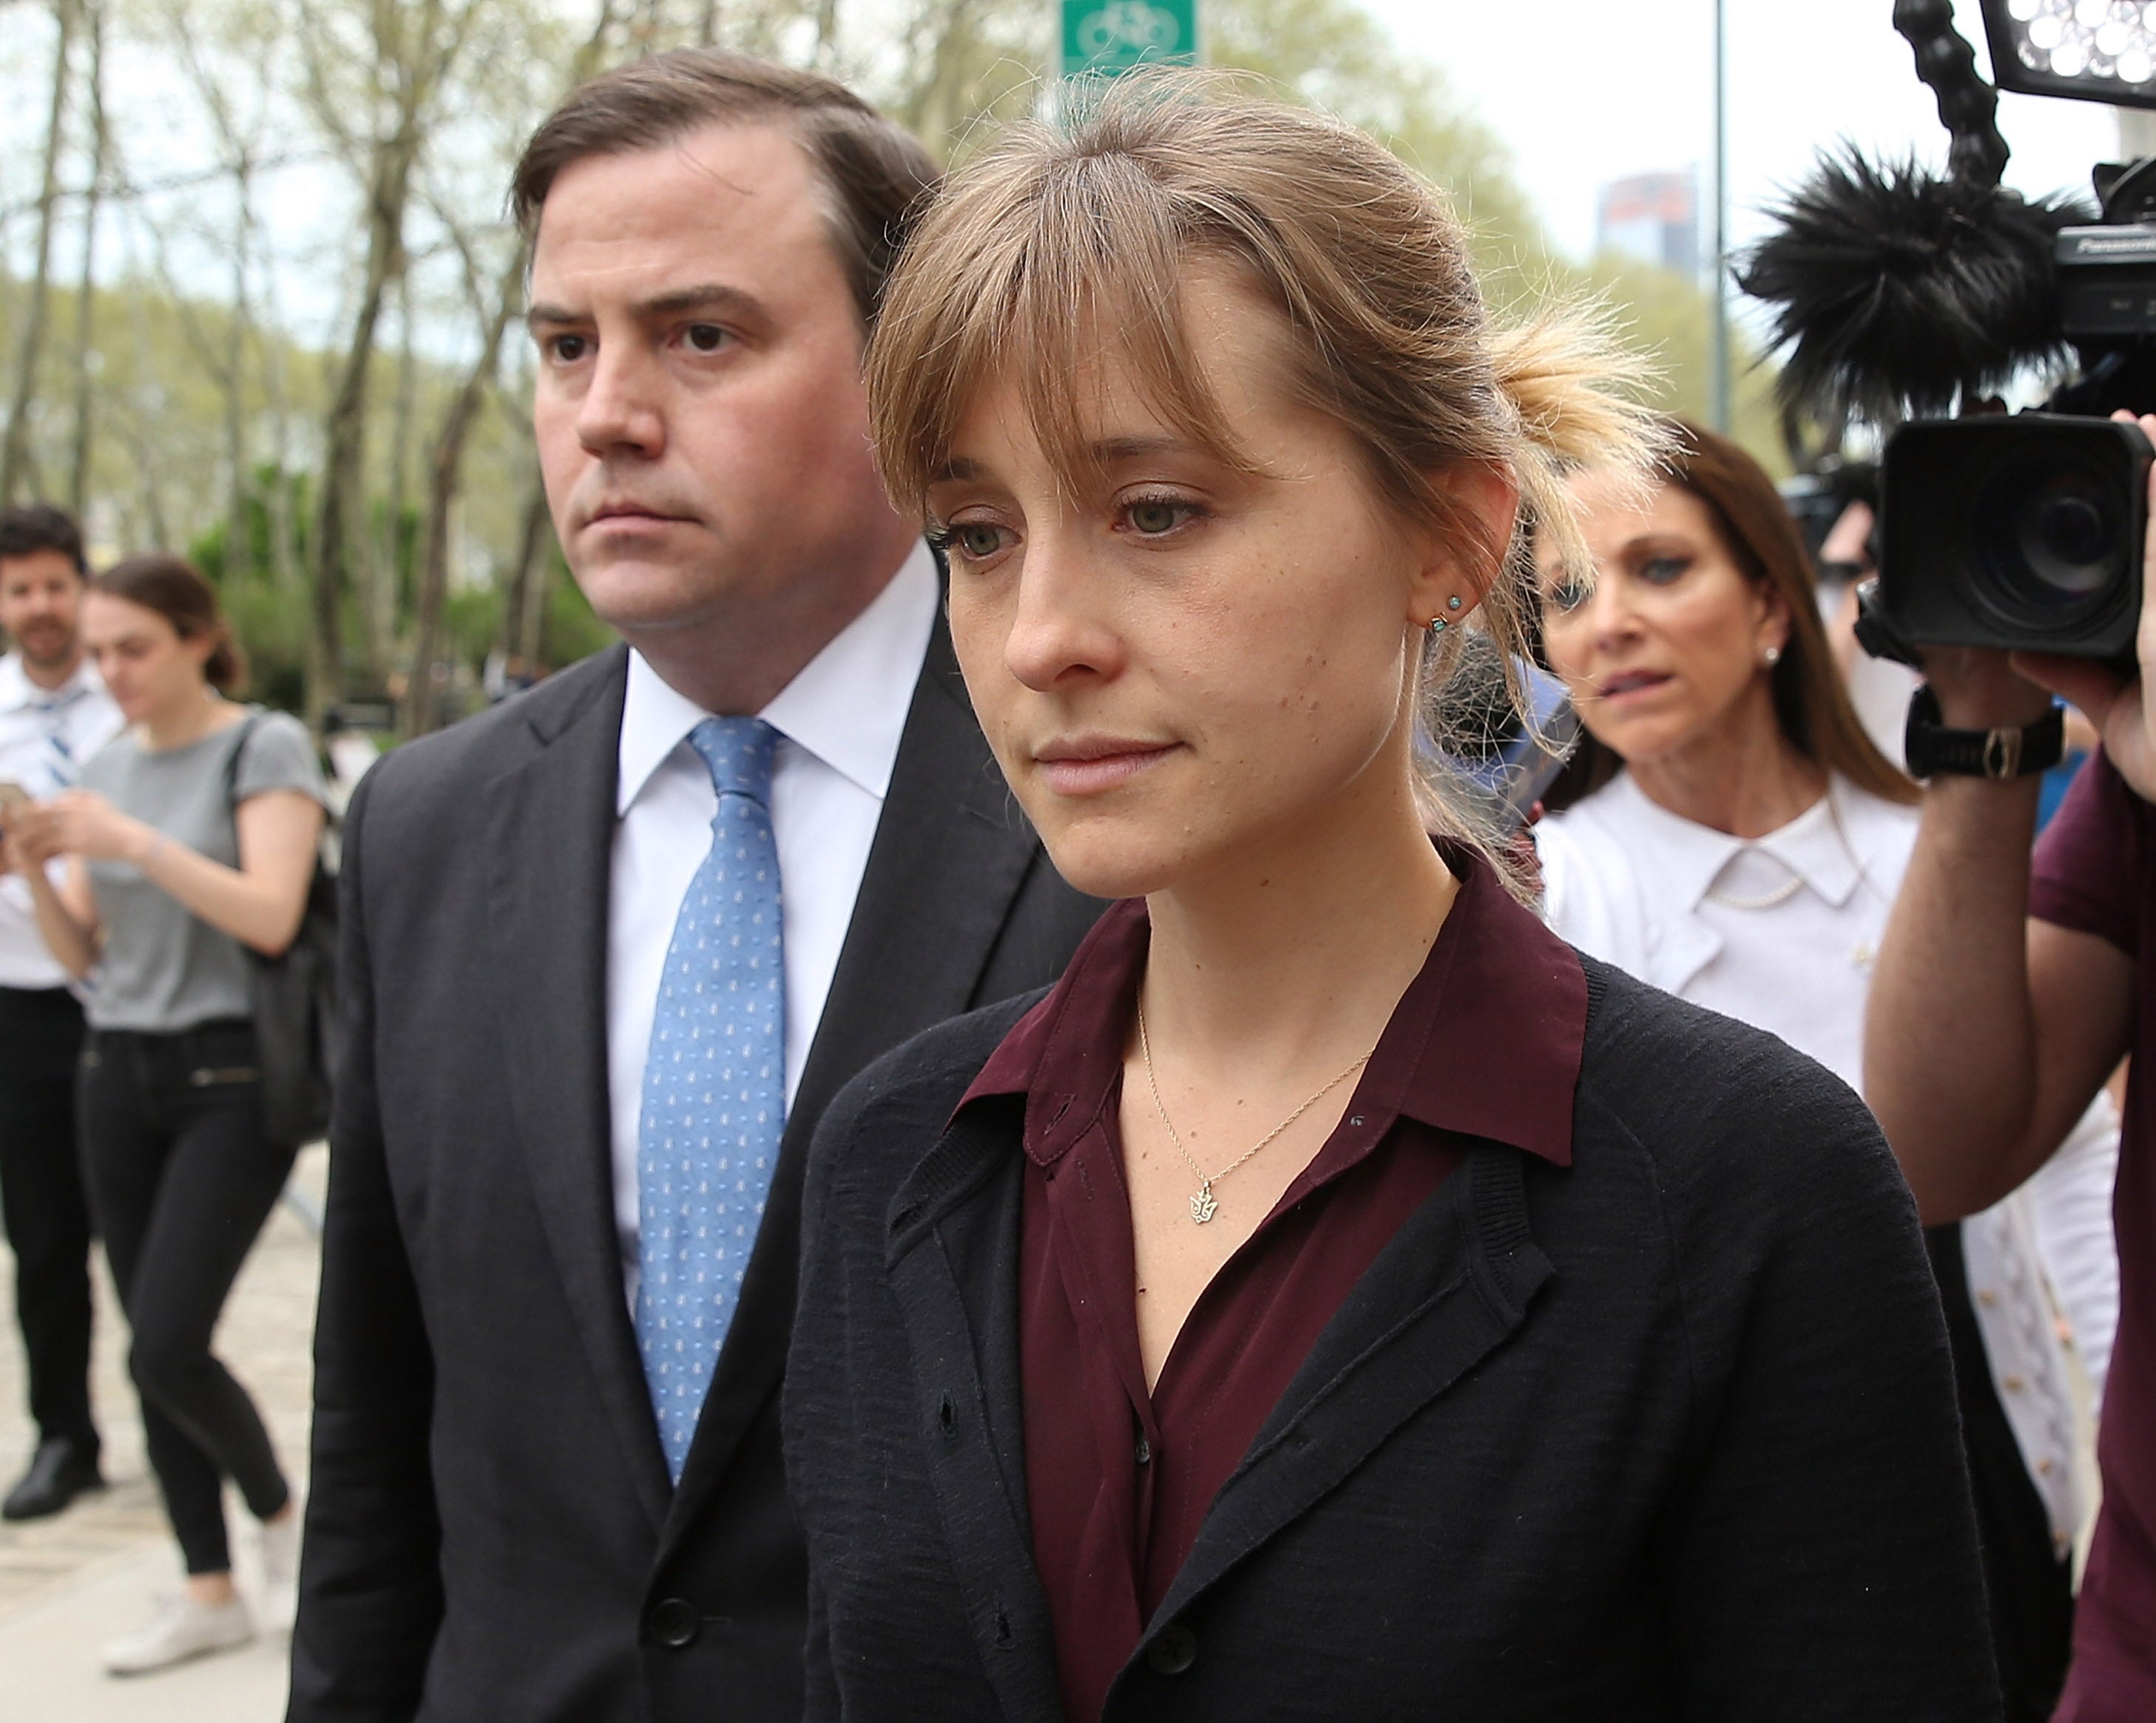 ‘Smallville’ actor Allison Mack departs the United States Eastern District Court in Brooklyn on 4 May 2018